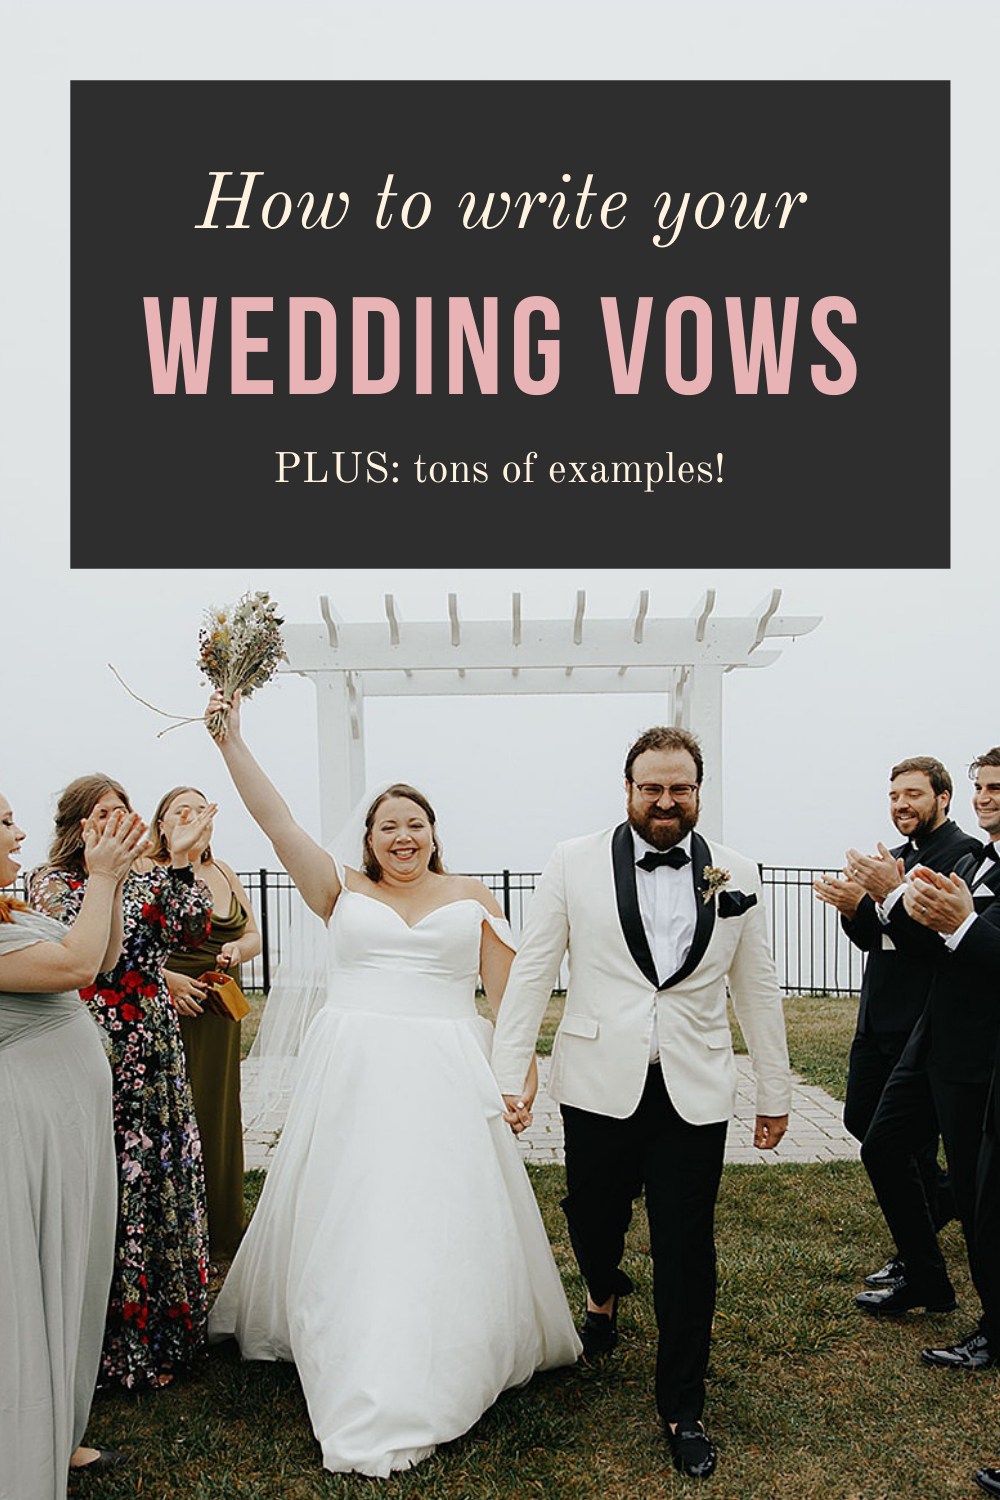 Image of couple immediately after wedding ceremony with text that says "How to write your wedding vows"